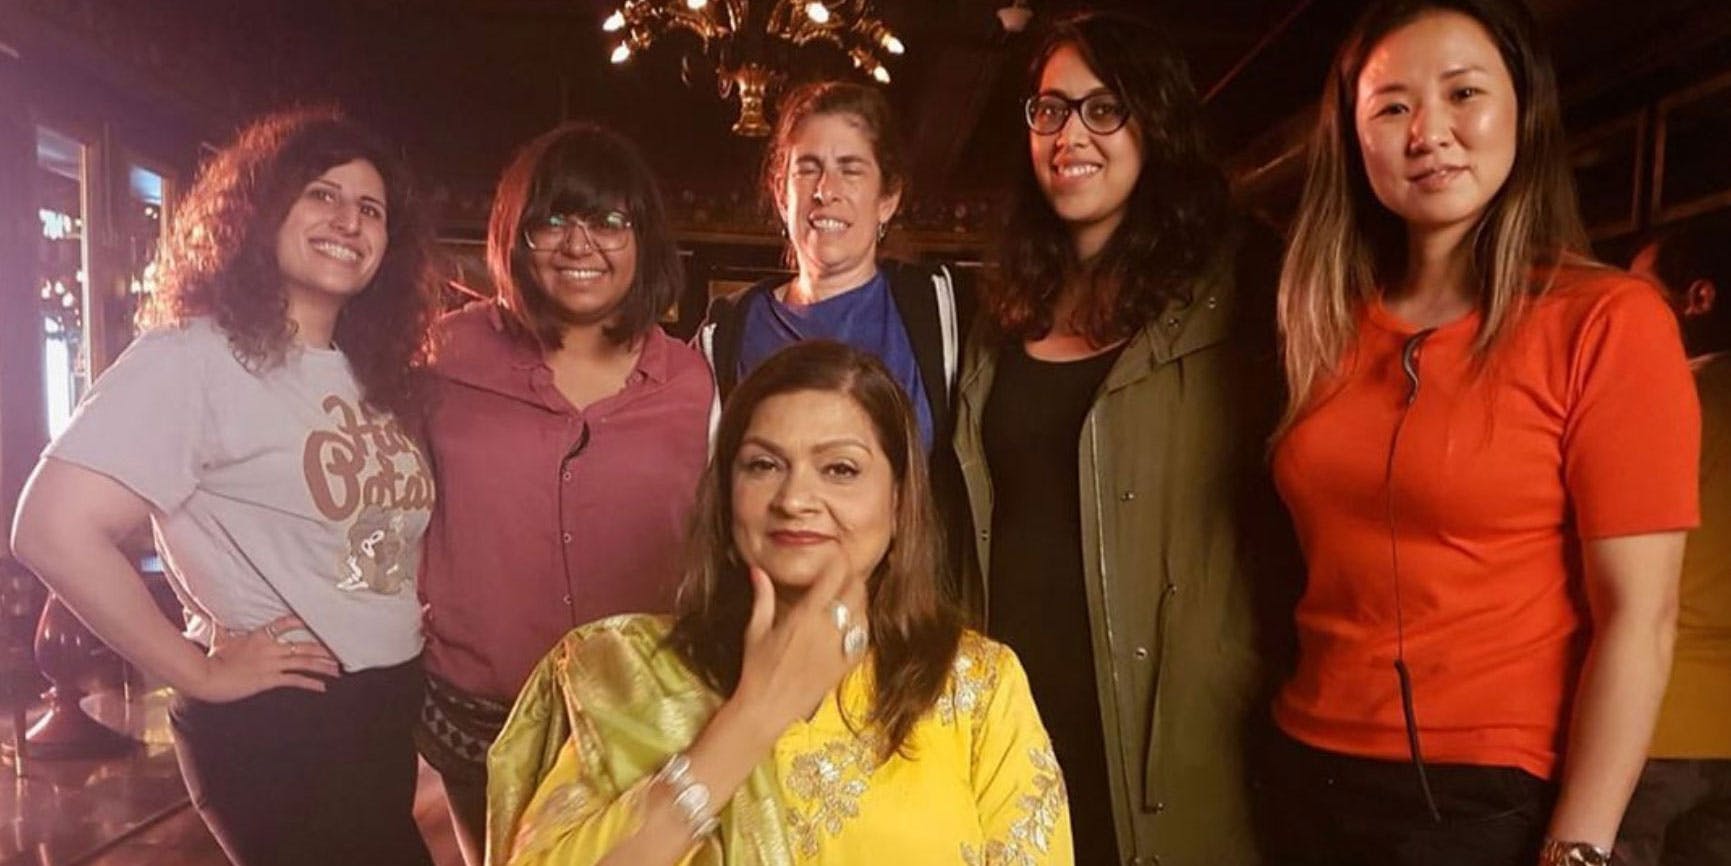 Smriti Mundhra (second from right) and other show producers, with matchmaker Sima Taparia. (Via Instagram)